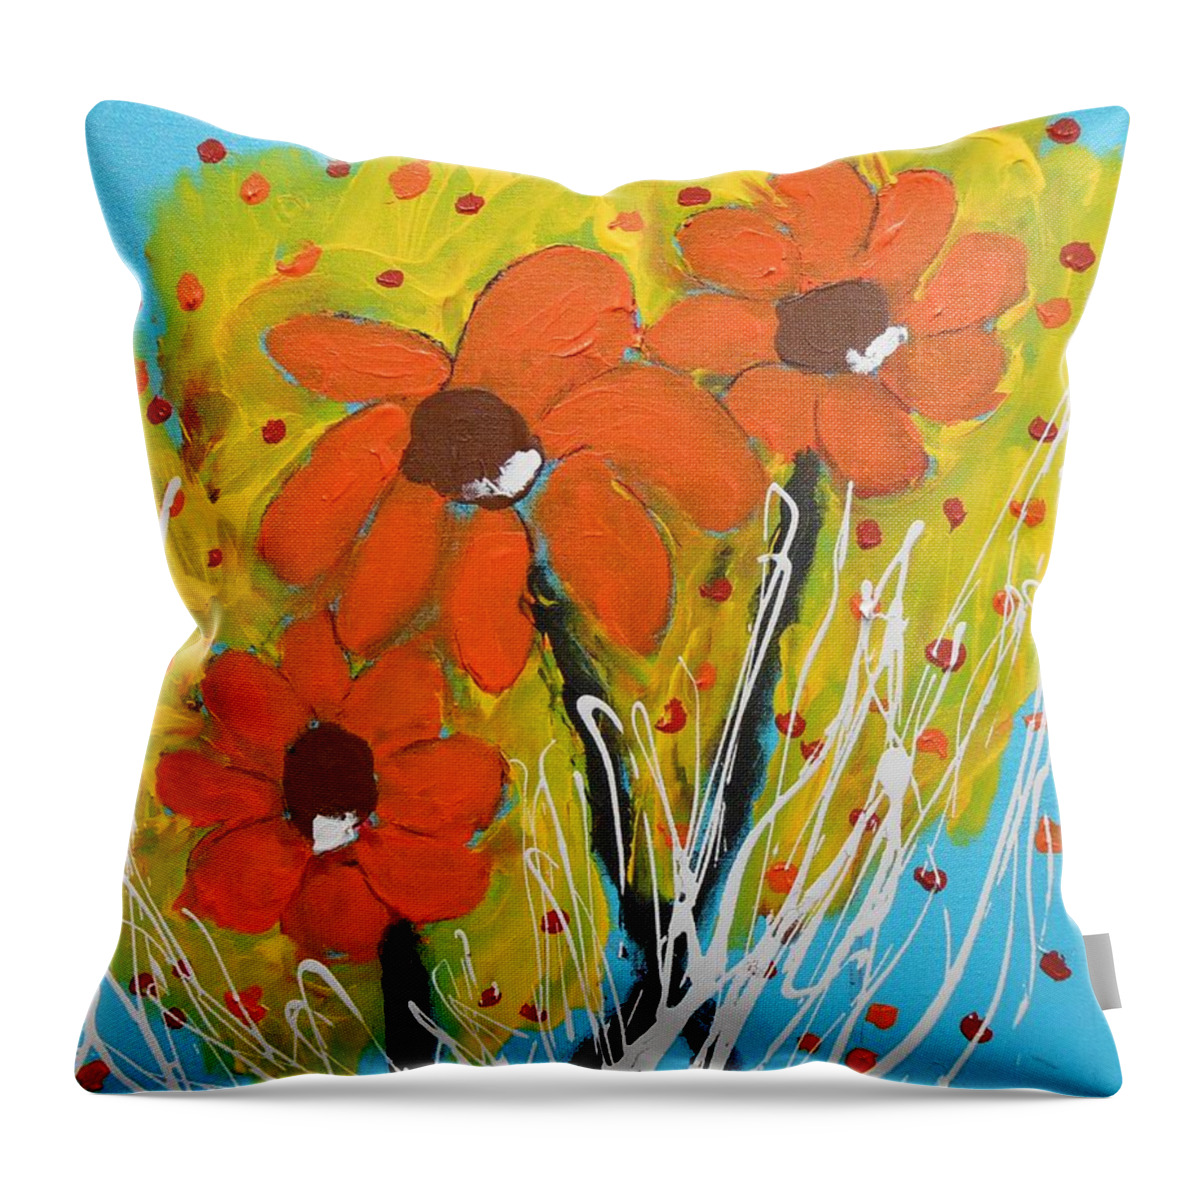 Abstract Throw Pillow featuring the painting Mexican Sunflowers Flower Garden by GH FiLben